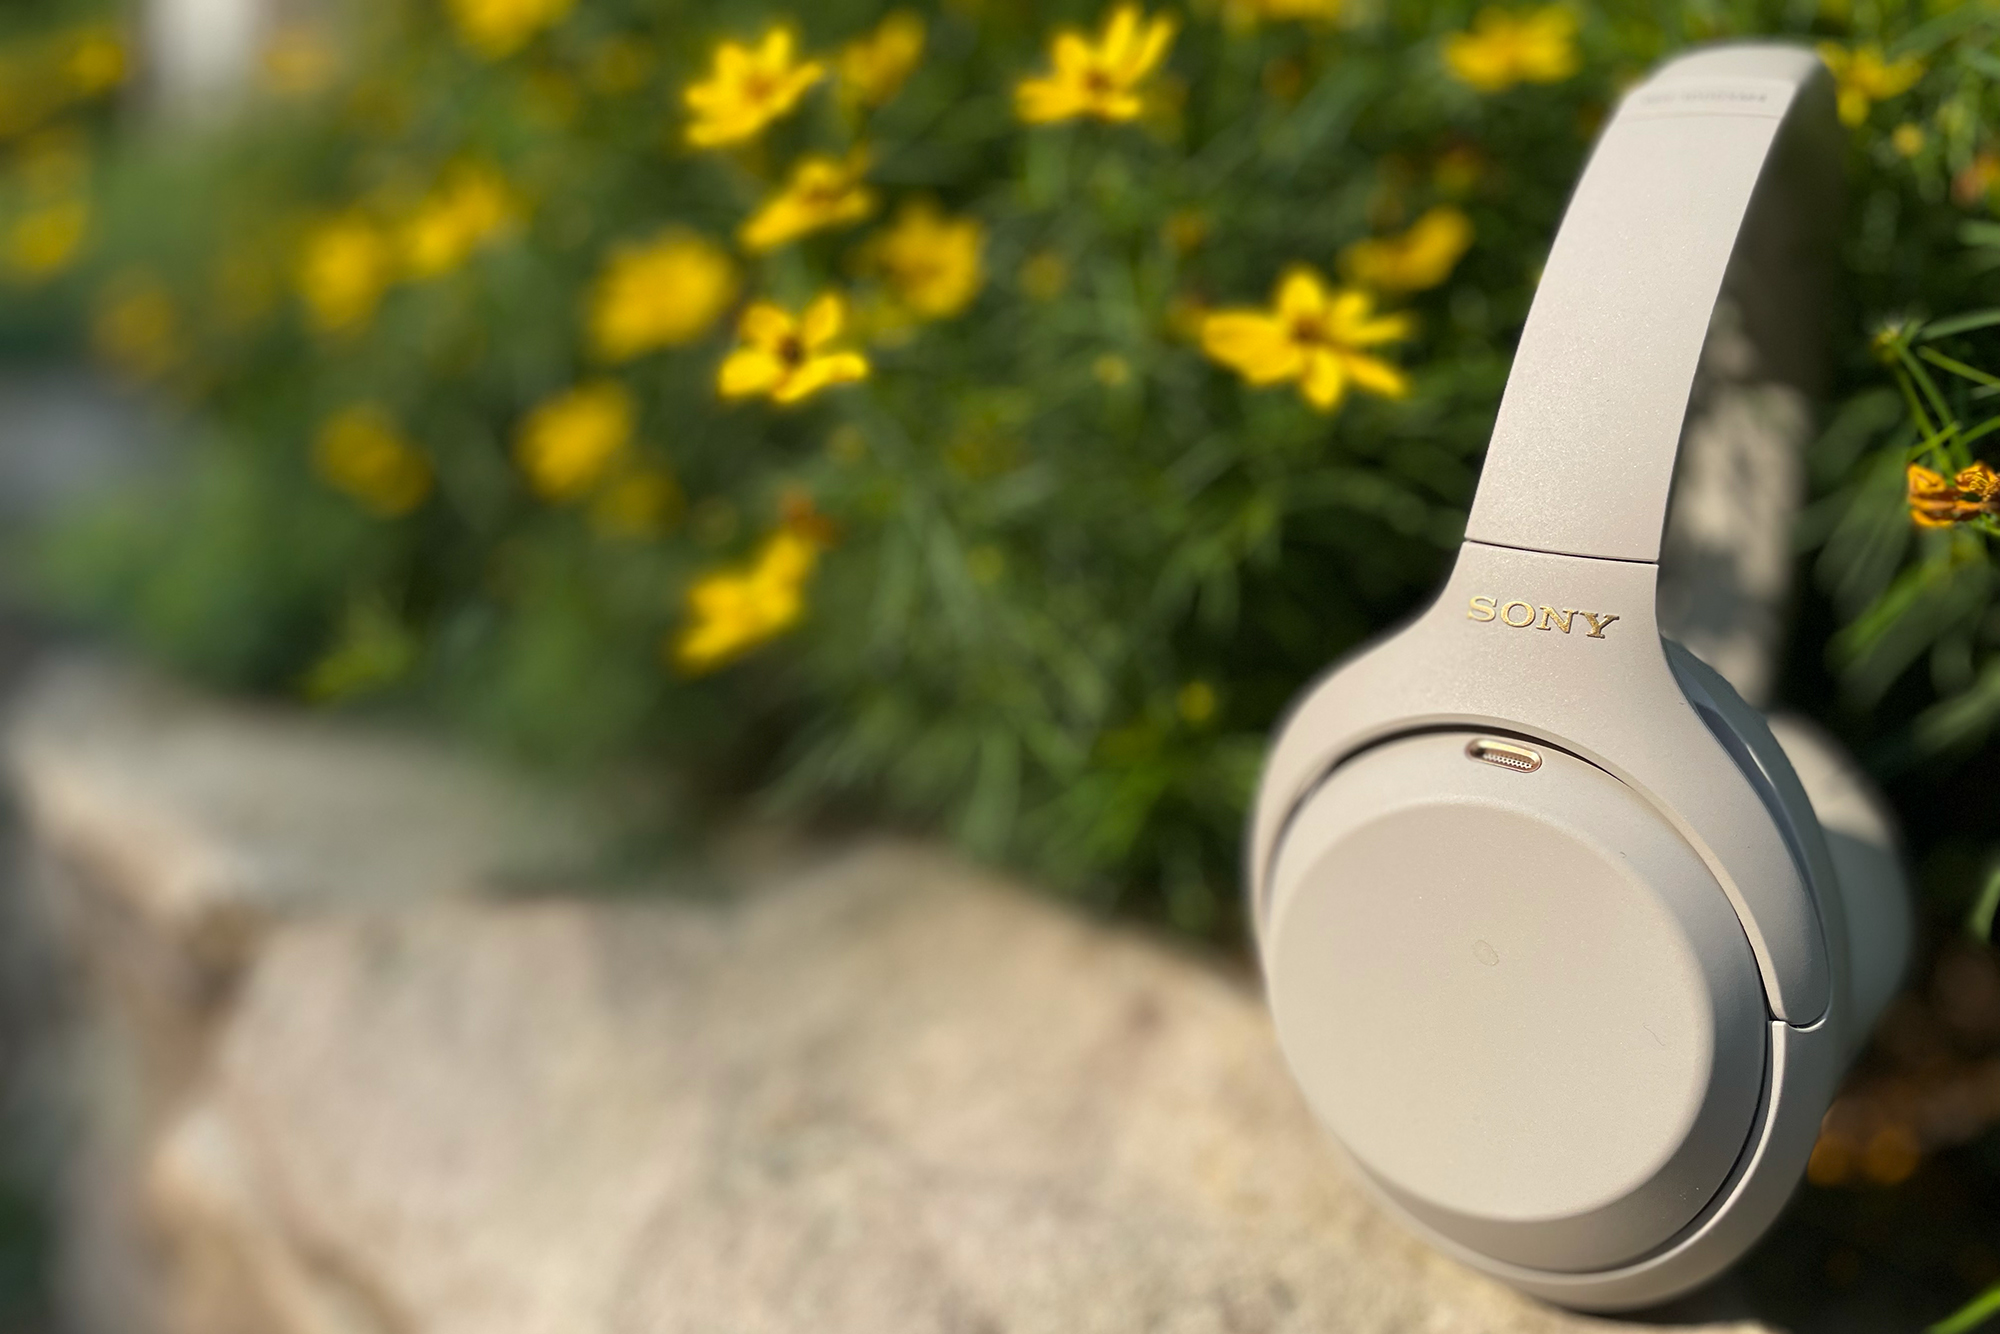 Sony WH-1000XM4 Wireless Noise-Canceling Headphone Review - My Site